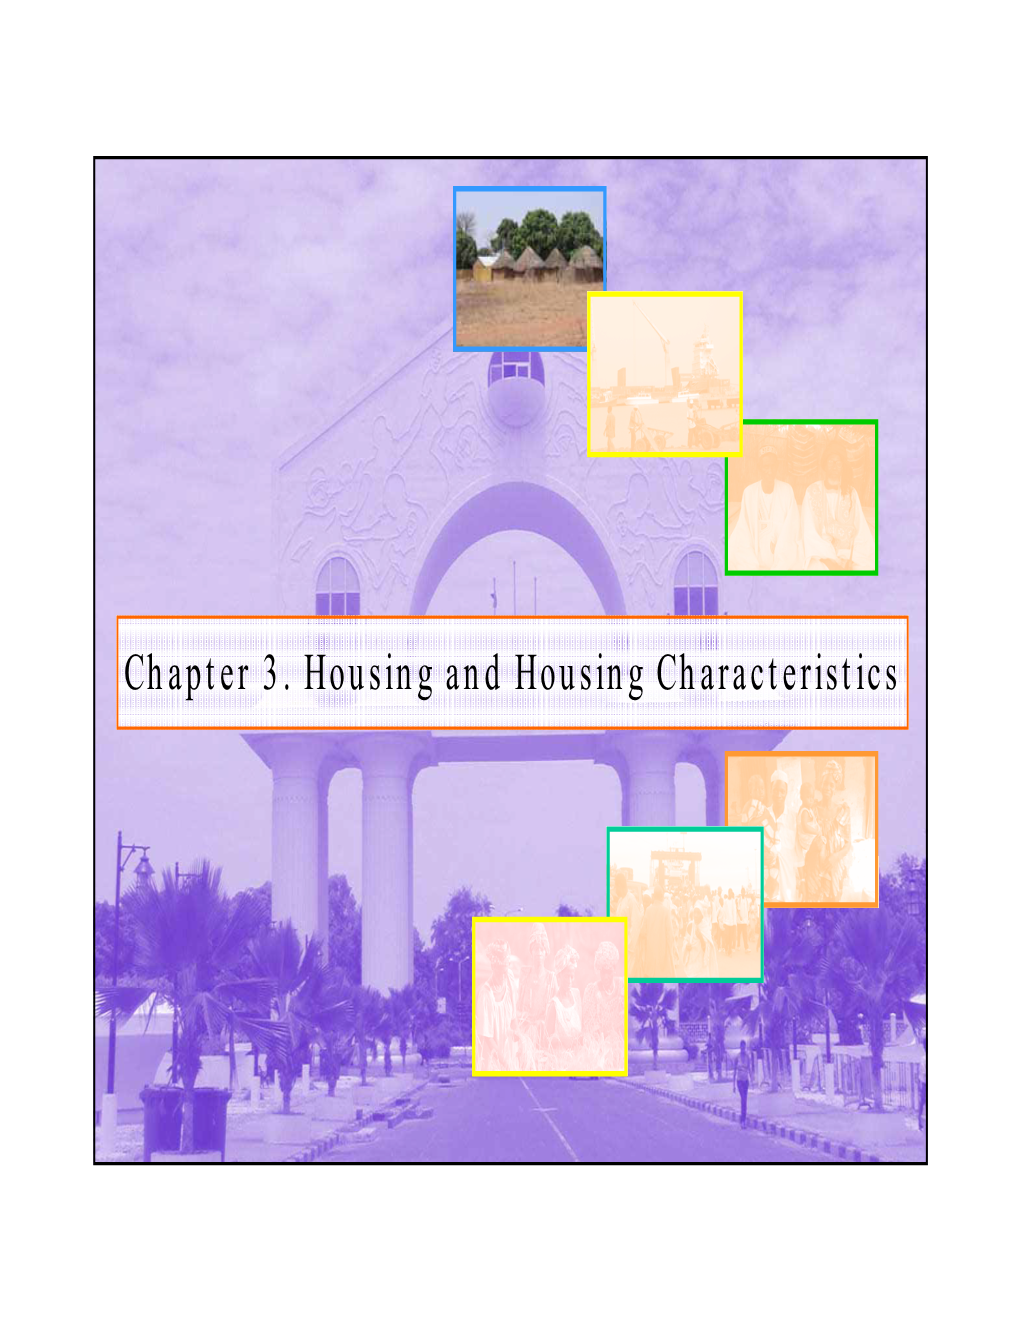 Chapter 3. Household and Housing Characteristics